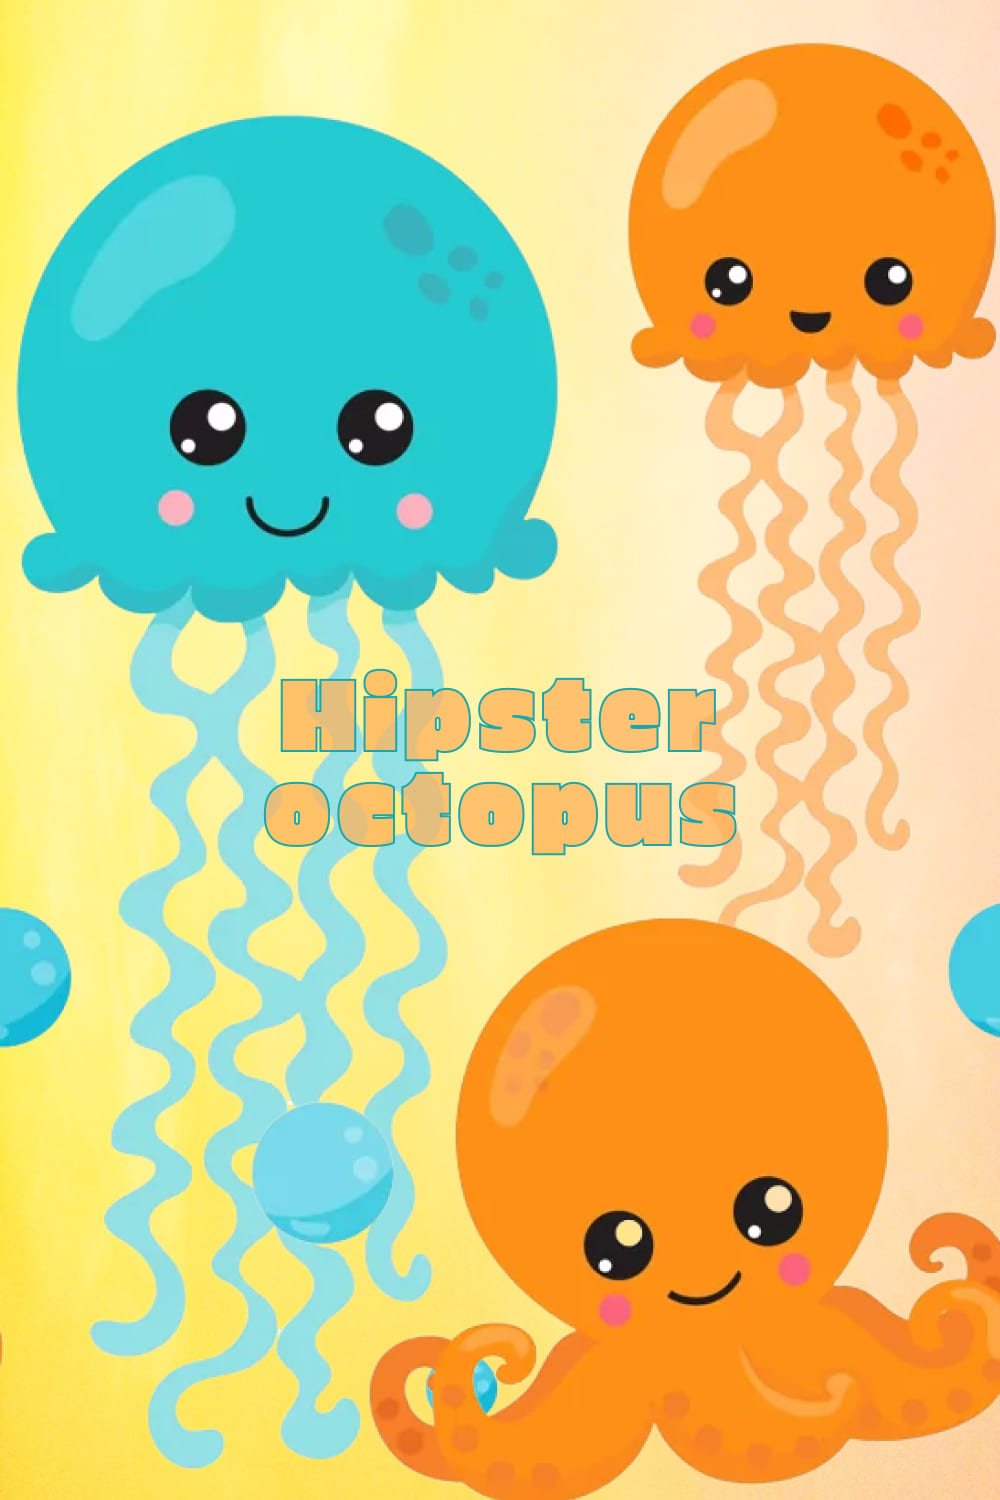 Hipster Octopus Emoji Graphics and Illustrations pinterest image.